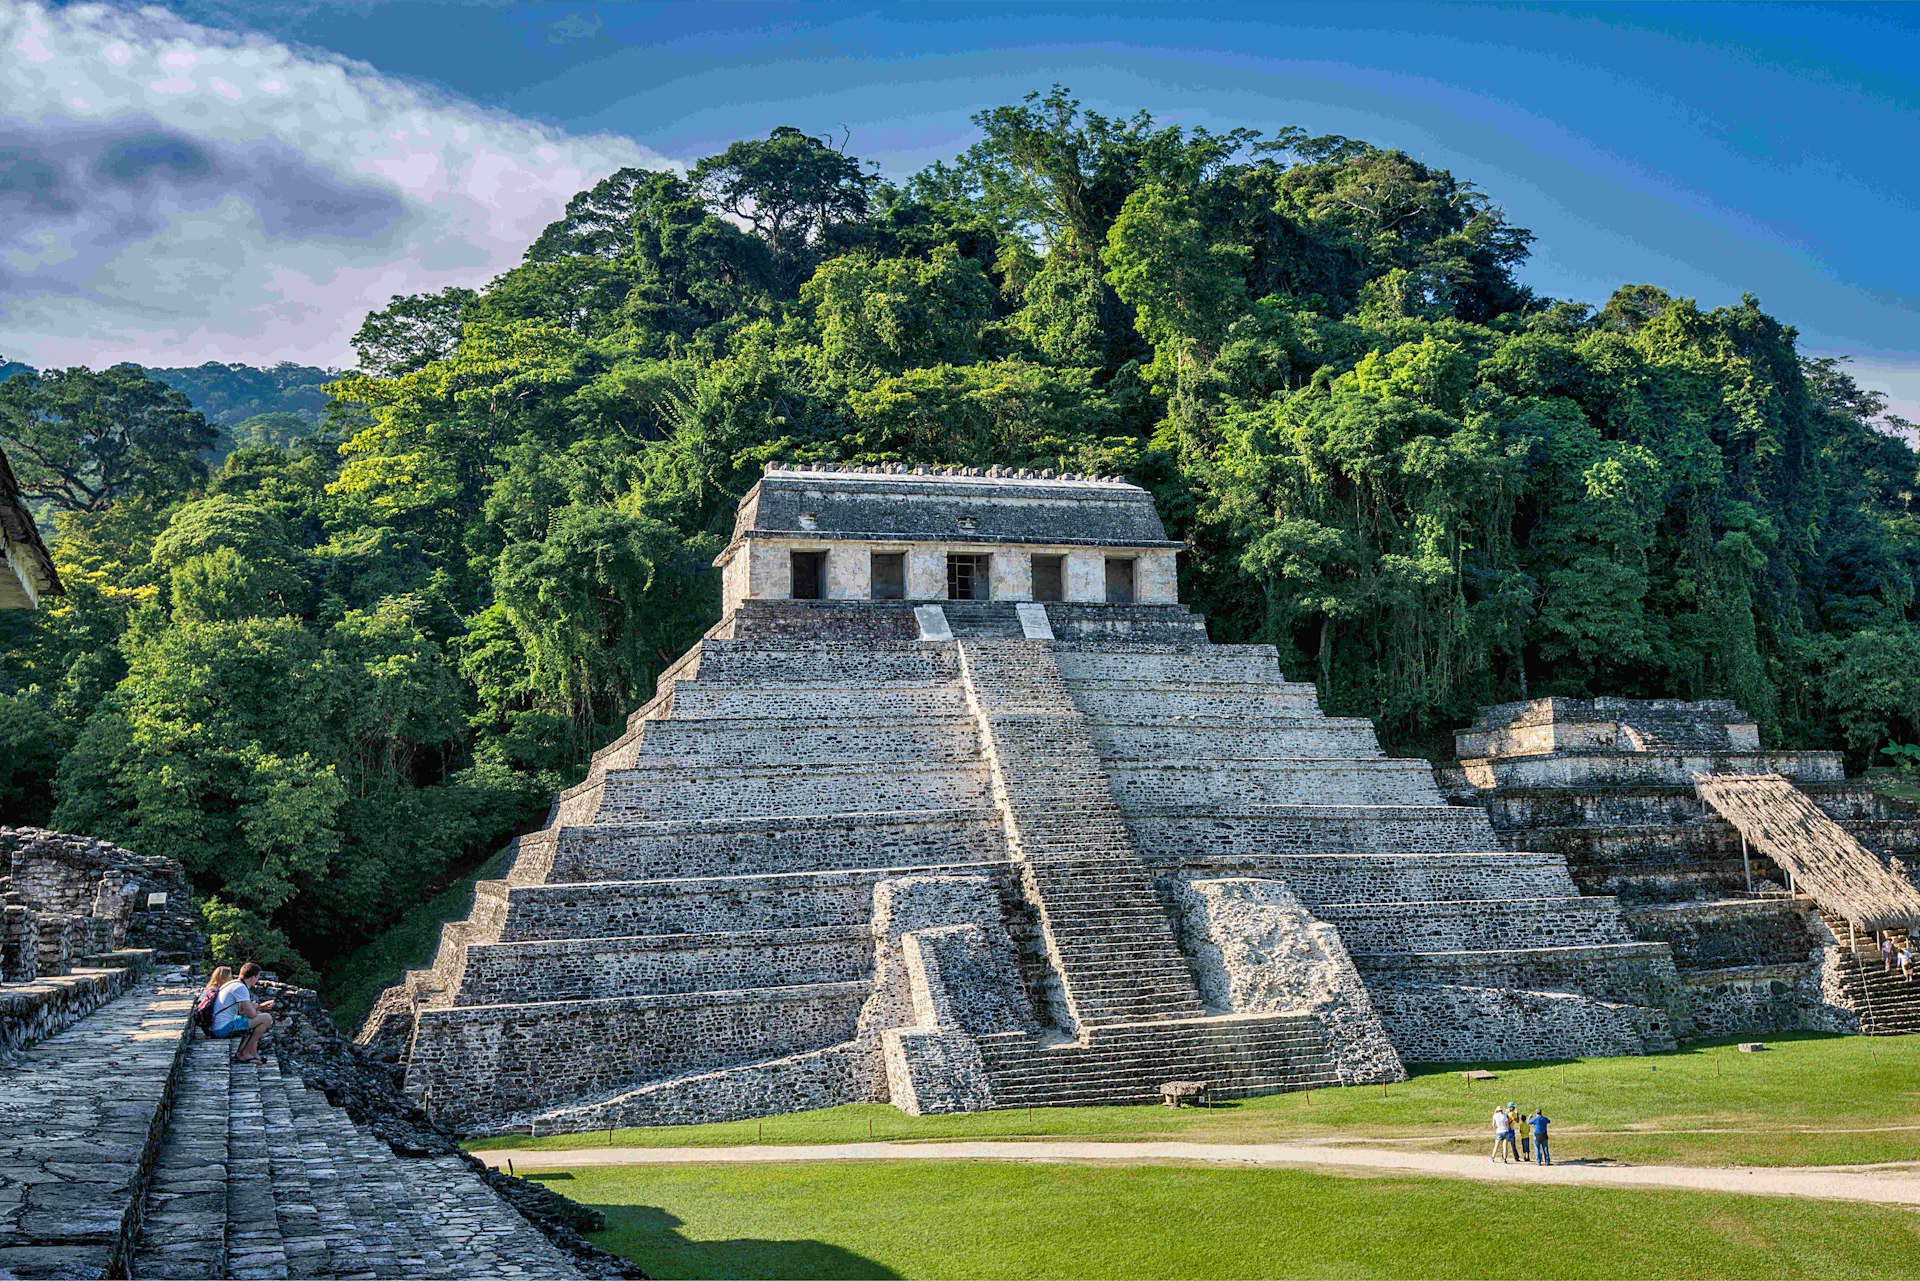 The jungle ruins of Palenque are one of Chiapas' most famous sights. Image by Witold Skrypczak / Lonely Planet Images / Getty Images